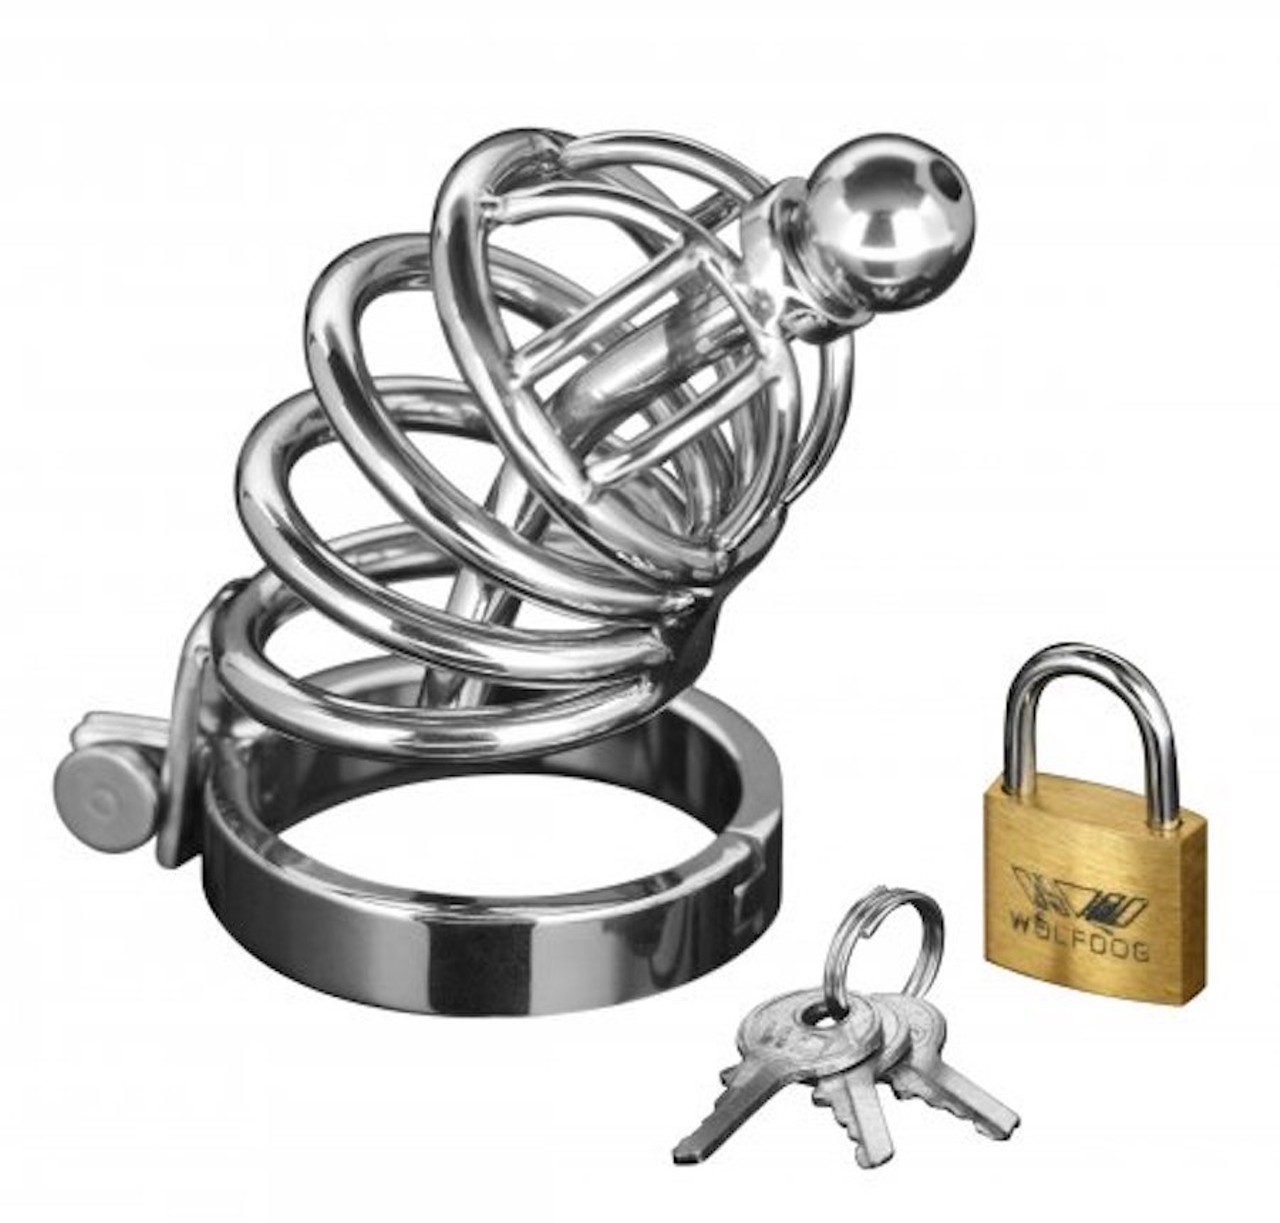 For those who need to behave themselves &#151; and who also rarely lose their keys 
Asylum 4-Ring Locking Chastity Cage, $109.99
Janet's Dungeon, 2317 Fort St., Wyandotte; 734-285-2609; janetsdungeon.com
Have you been touching yourself a bit too much? No, we know, there's no such thing, but for those who lack control and want someone else to take over, welcome this device, which will lock your little &#151; or big &#151; Houdini up so you can focus on, well, more pressing matters. The Asylum Chastity Cage is stainless steel and curves for your curve with a removable cap at the tip. Now, here's where things get tricky: The kit comes with a lock and key set so you can eventually free your peen, which you will absolutely want to do at some point. For an added challenge, you could ask your quarantine partner to hide a few around the house. Just, for the love of god, don't forget where they are or do anything to piss off the key hider. 
Photo via chakrubs.com
